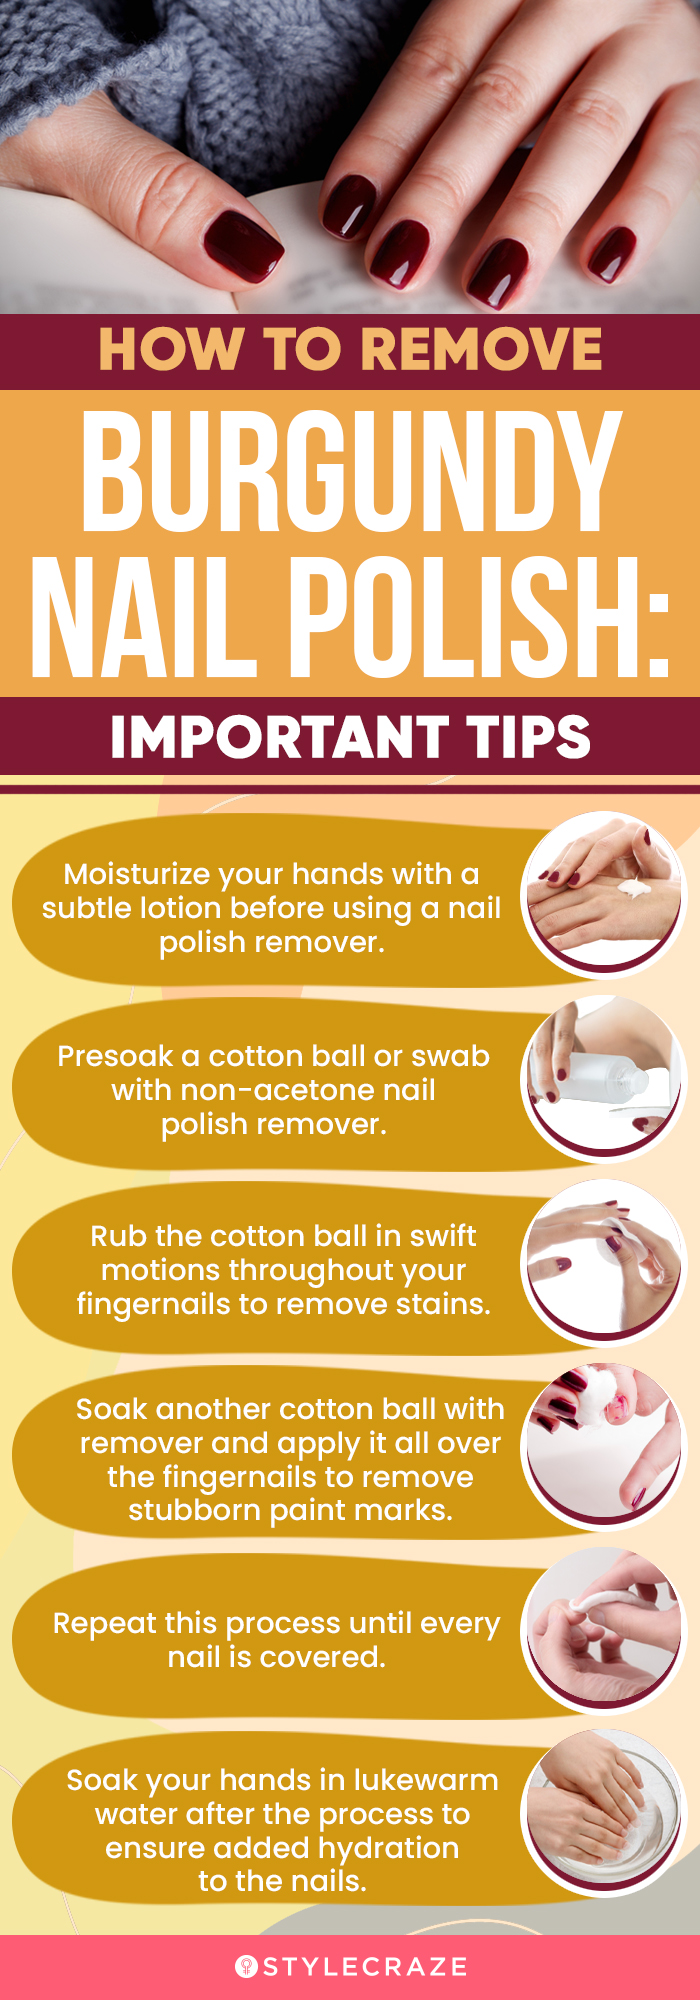 How To Remove A Burgundy Nail Polish Important Tips (infographic)